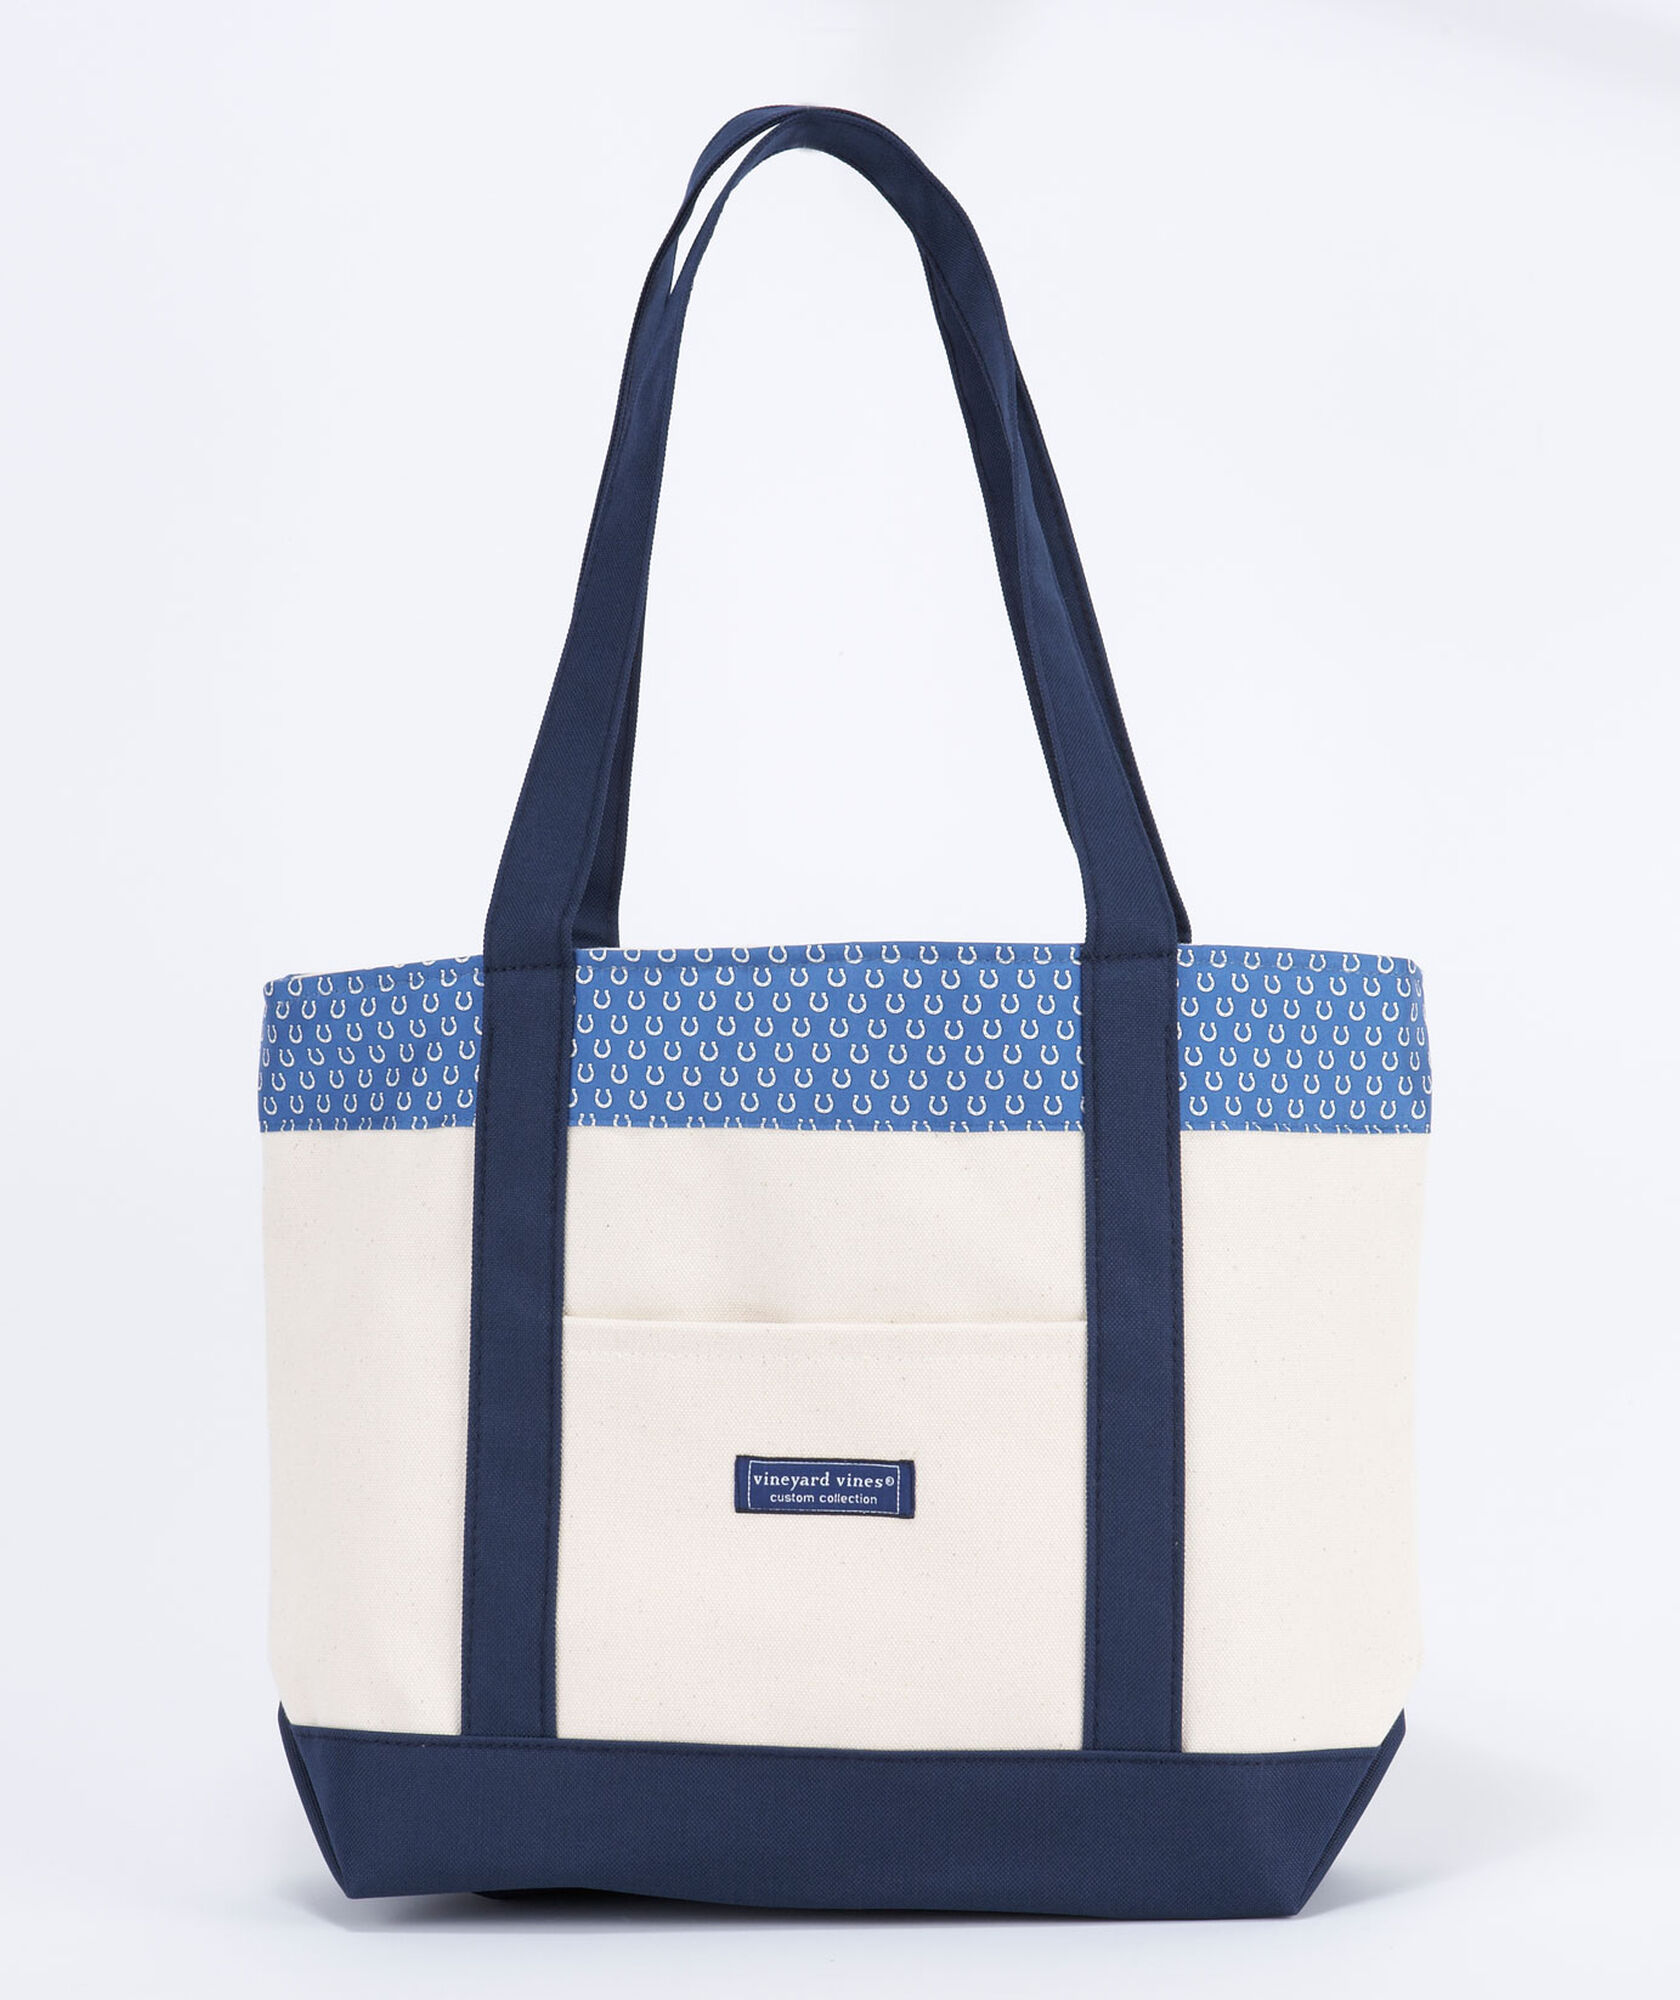 NFL Totes Indianapolis Colts Classic Tote for Women Vineyard Vines